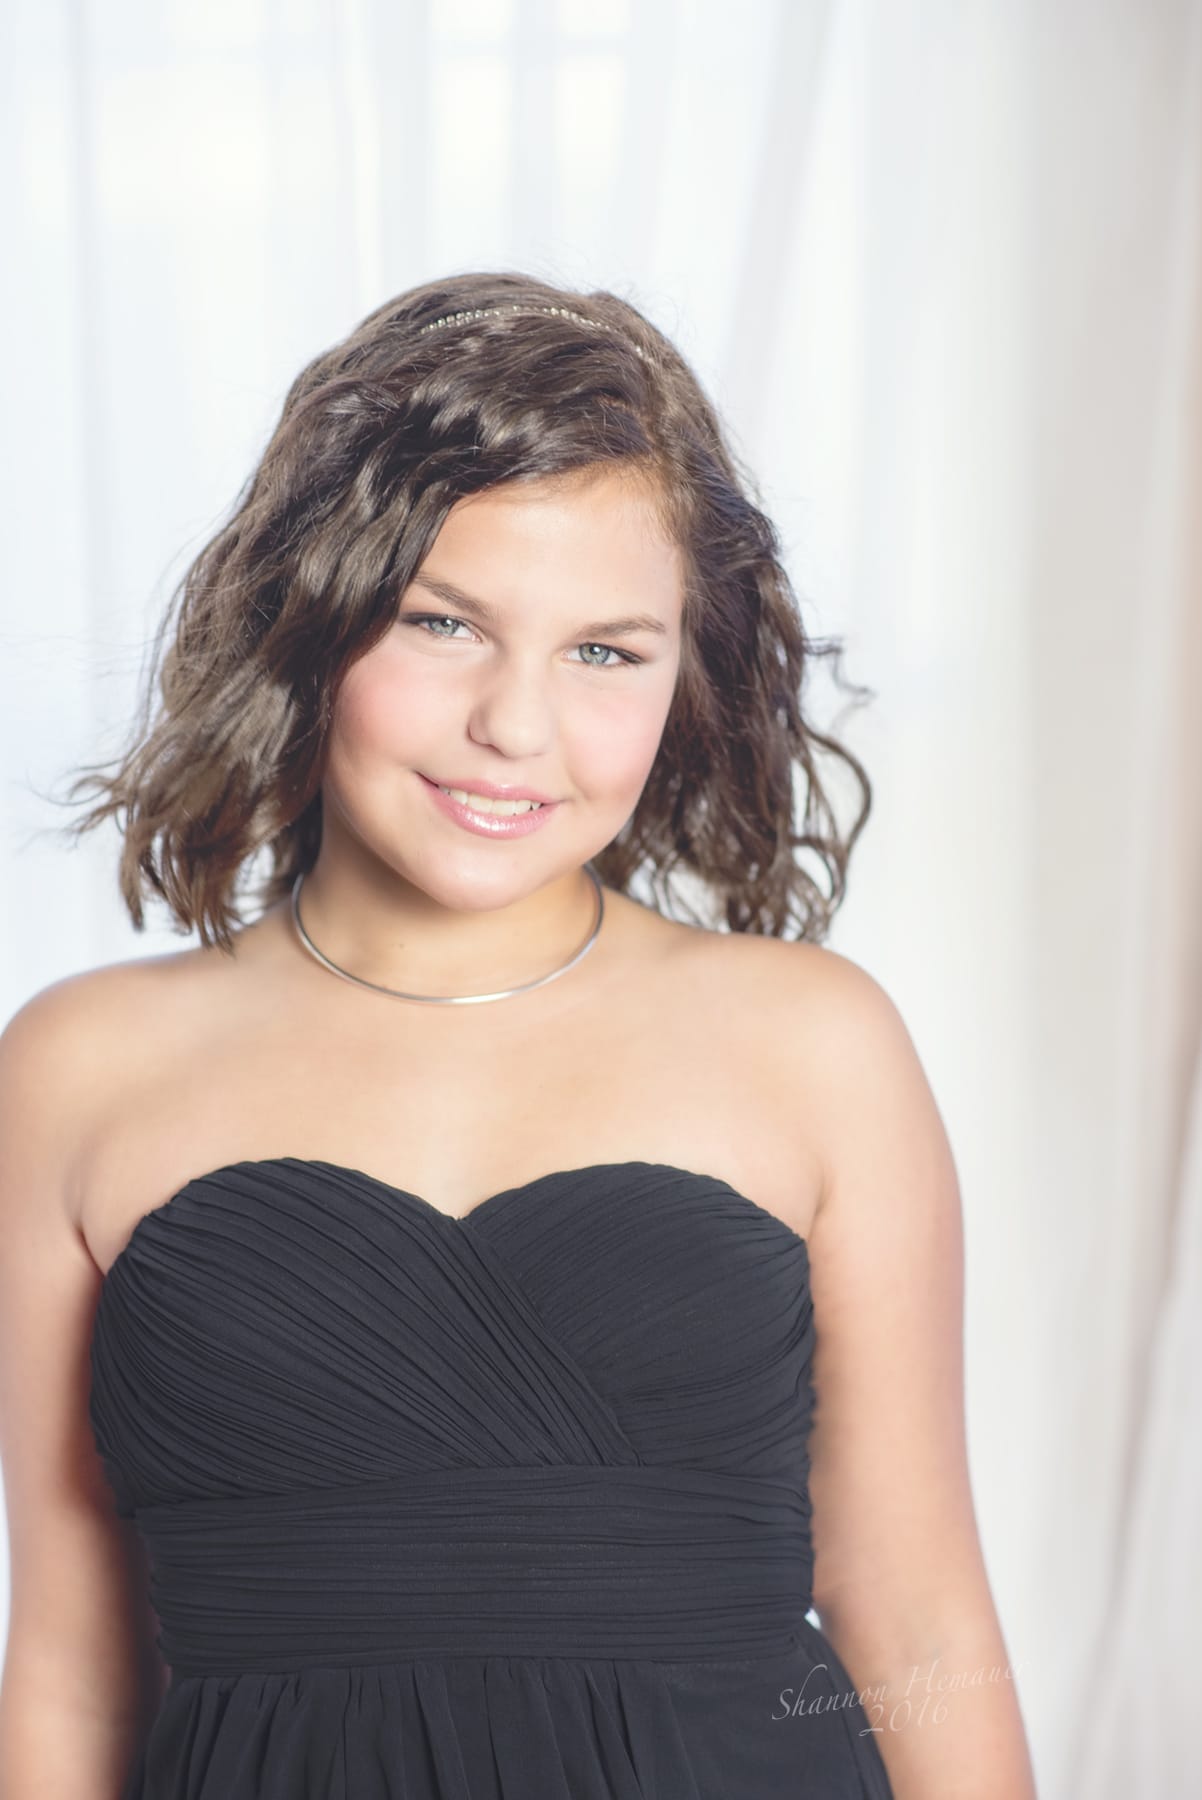 Tween Contemporary Glamour Carlisle PA Shannon Hemauer Photography